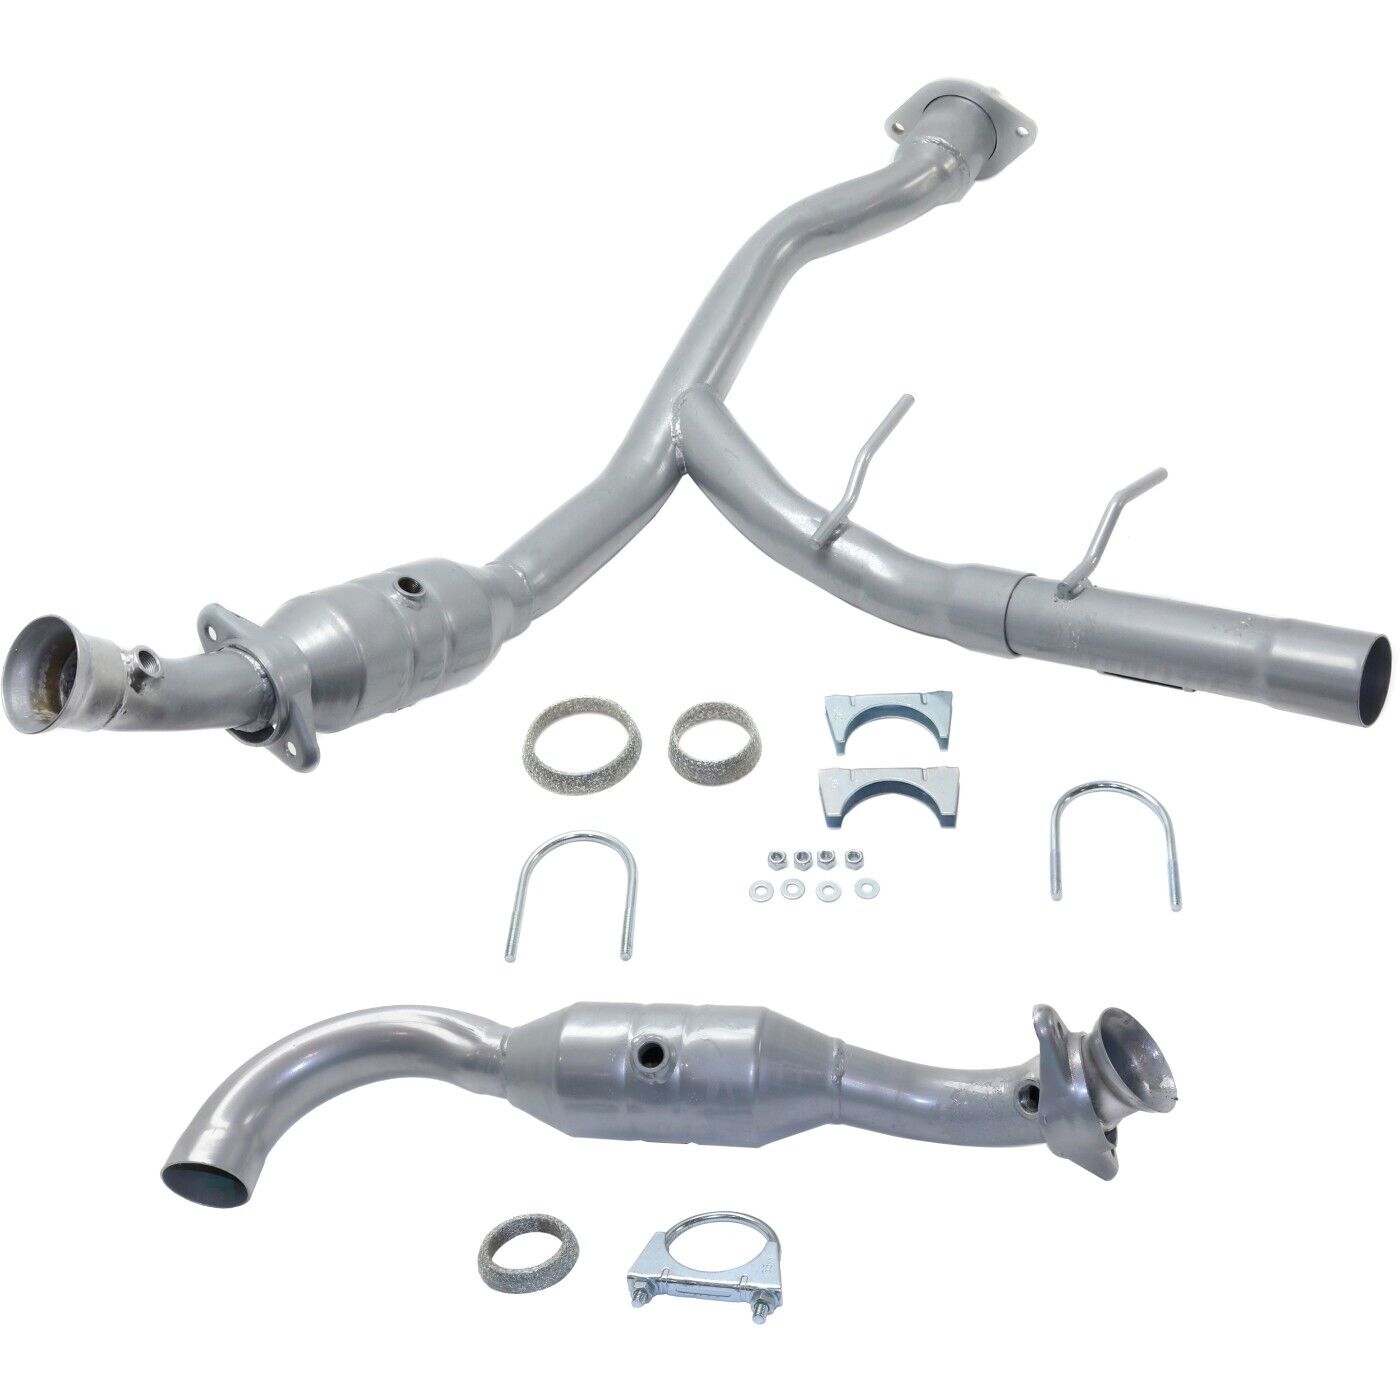 Catalytic Converter Set For 5.4L 2007-2013 Expedition Navigator 46-State Legal